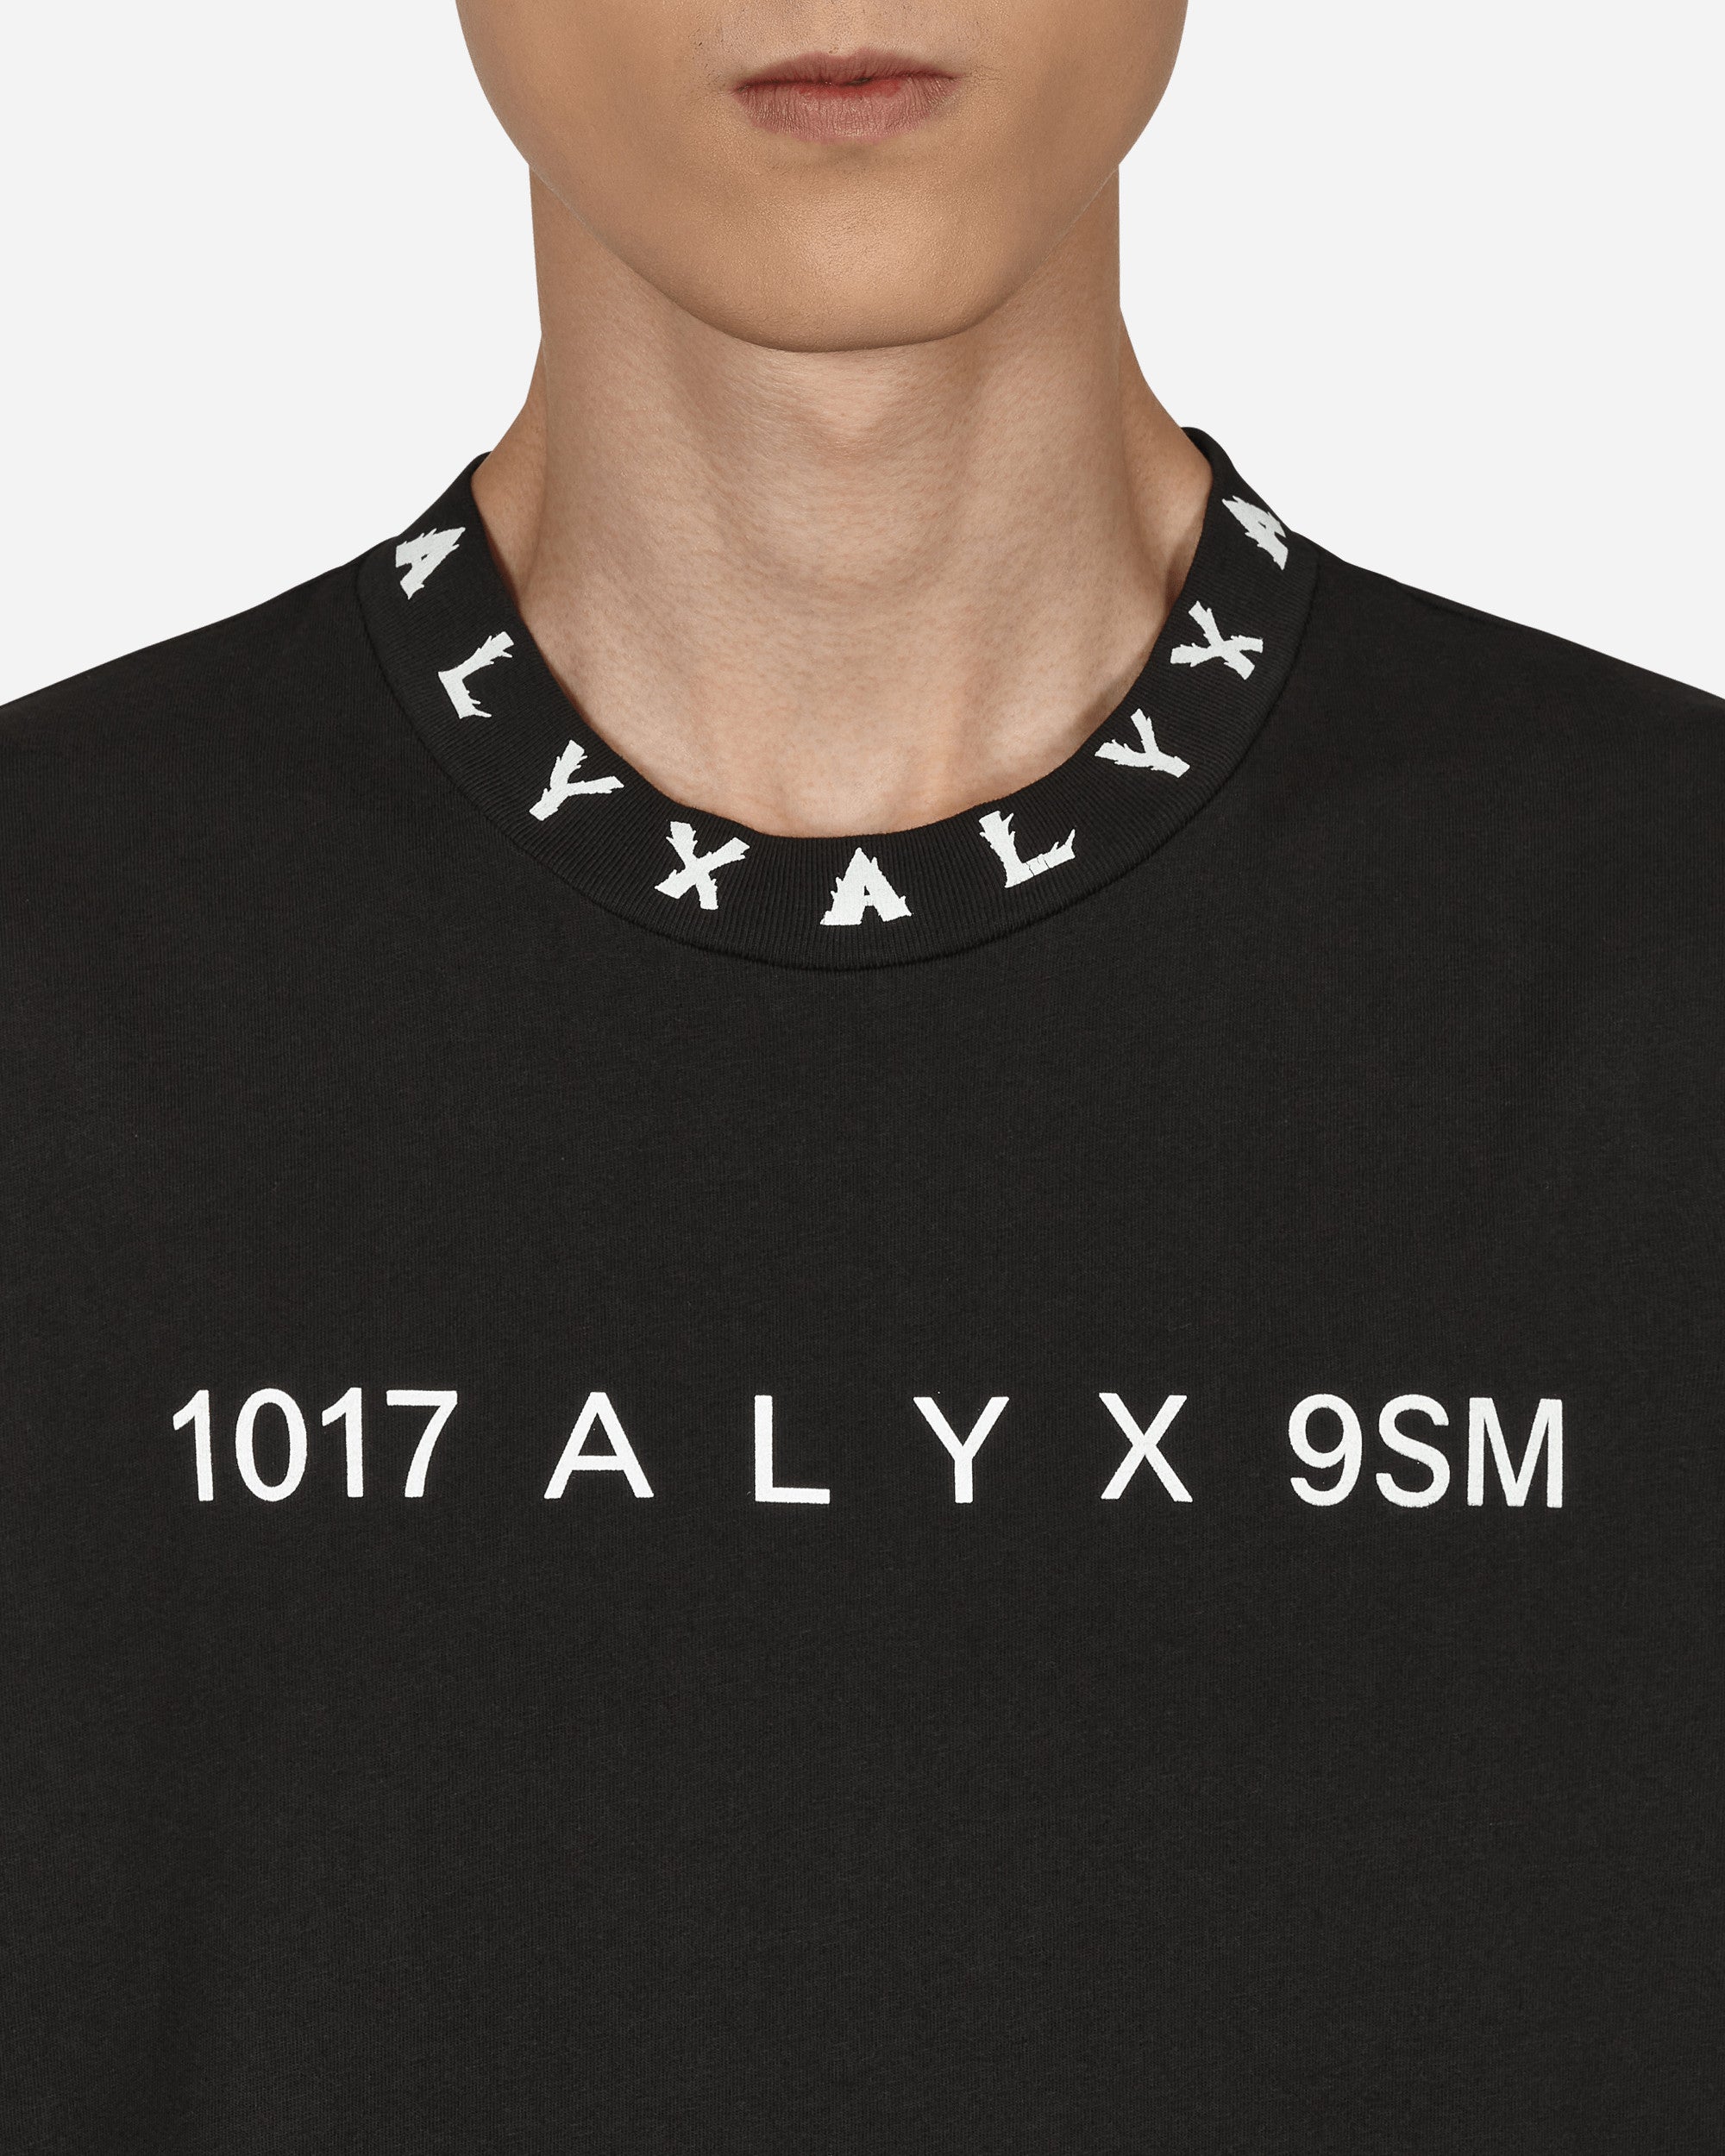 1017 Alyx 9SM S/S Graphic T-Shirt Black T-Shirts Shortsleeve AAMTS0333FA01 BLK0001